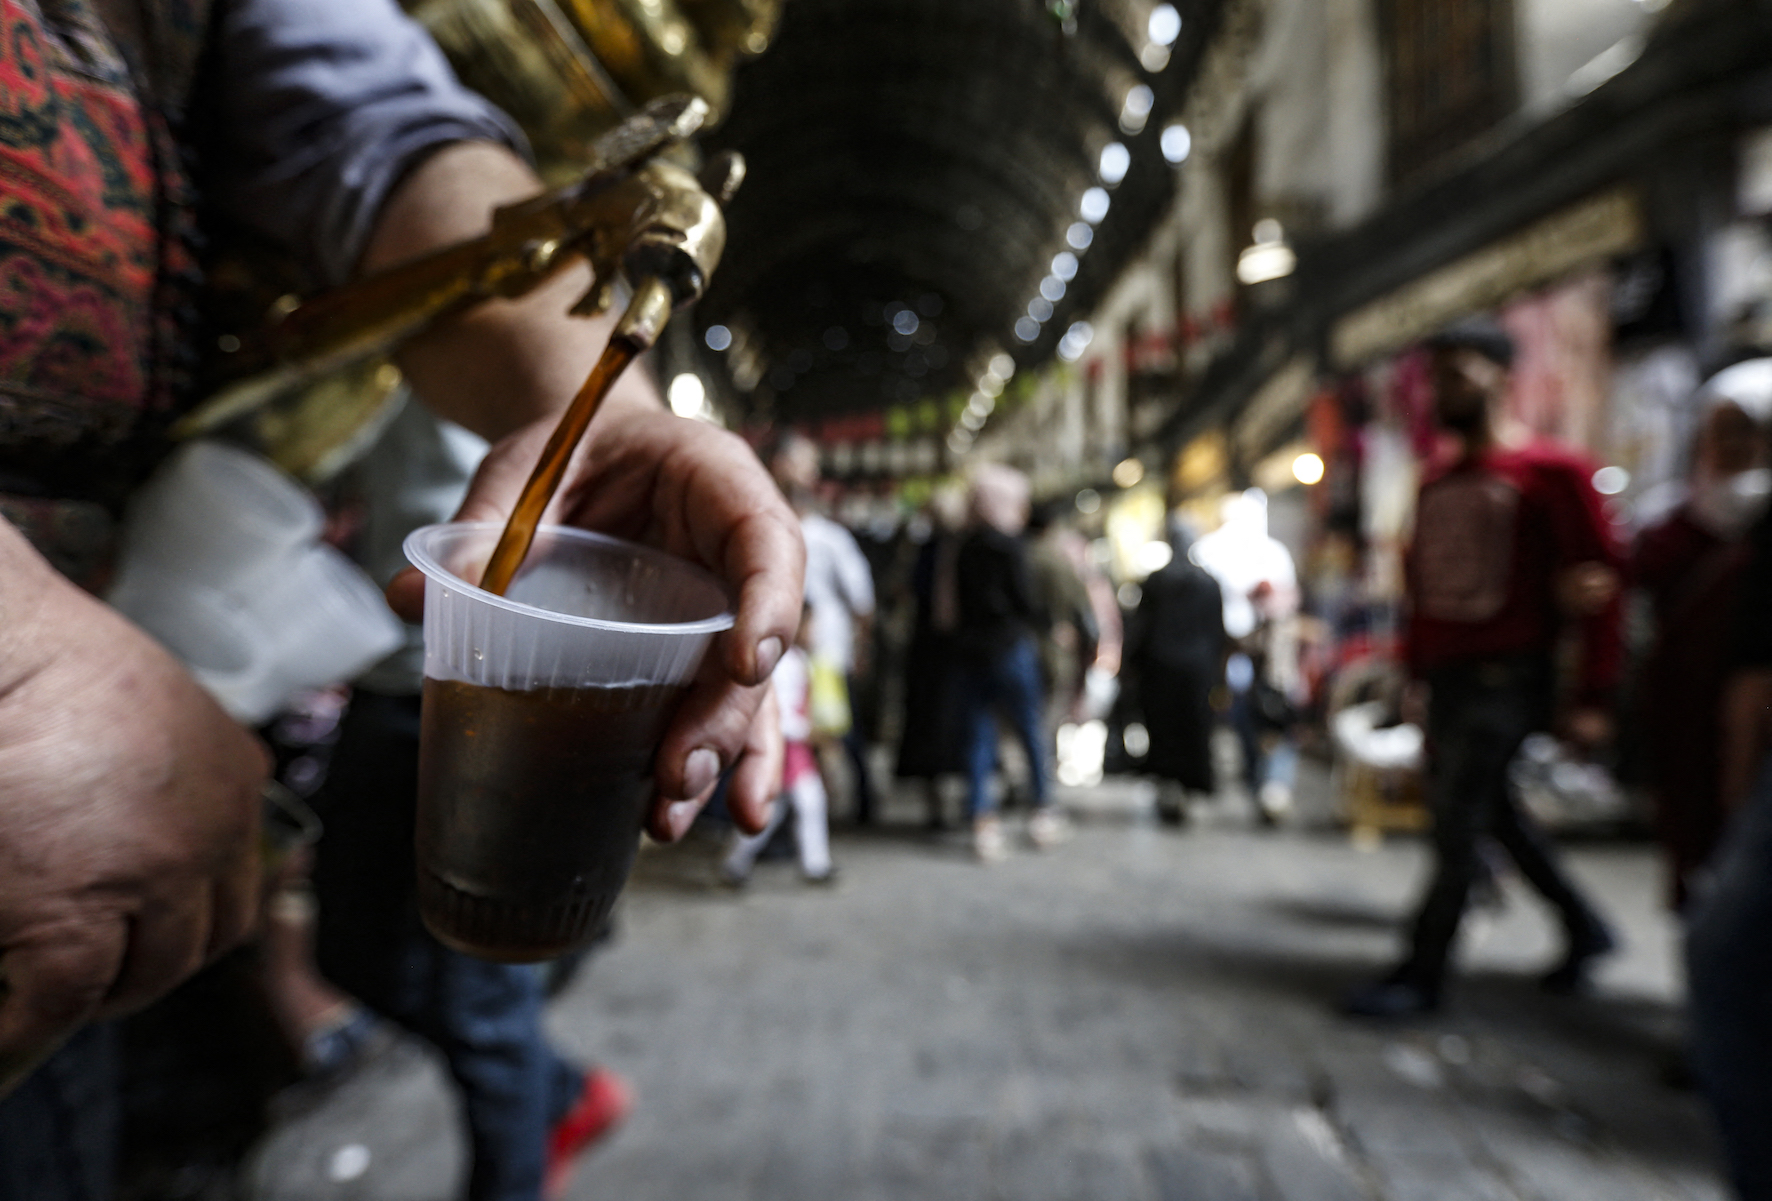 A tamarind juice seller, pours some tamarind to a customer in the Hamidiyah market in Damascus (AFP/ Louai Beshara)